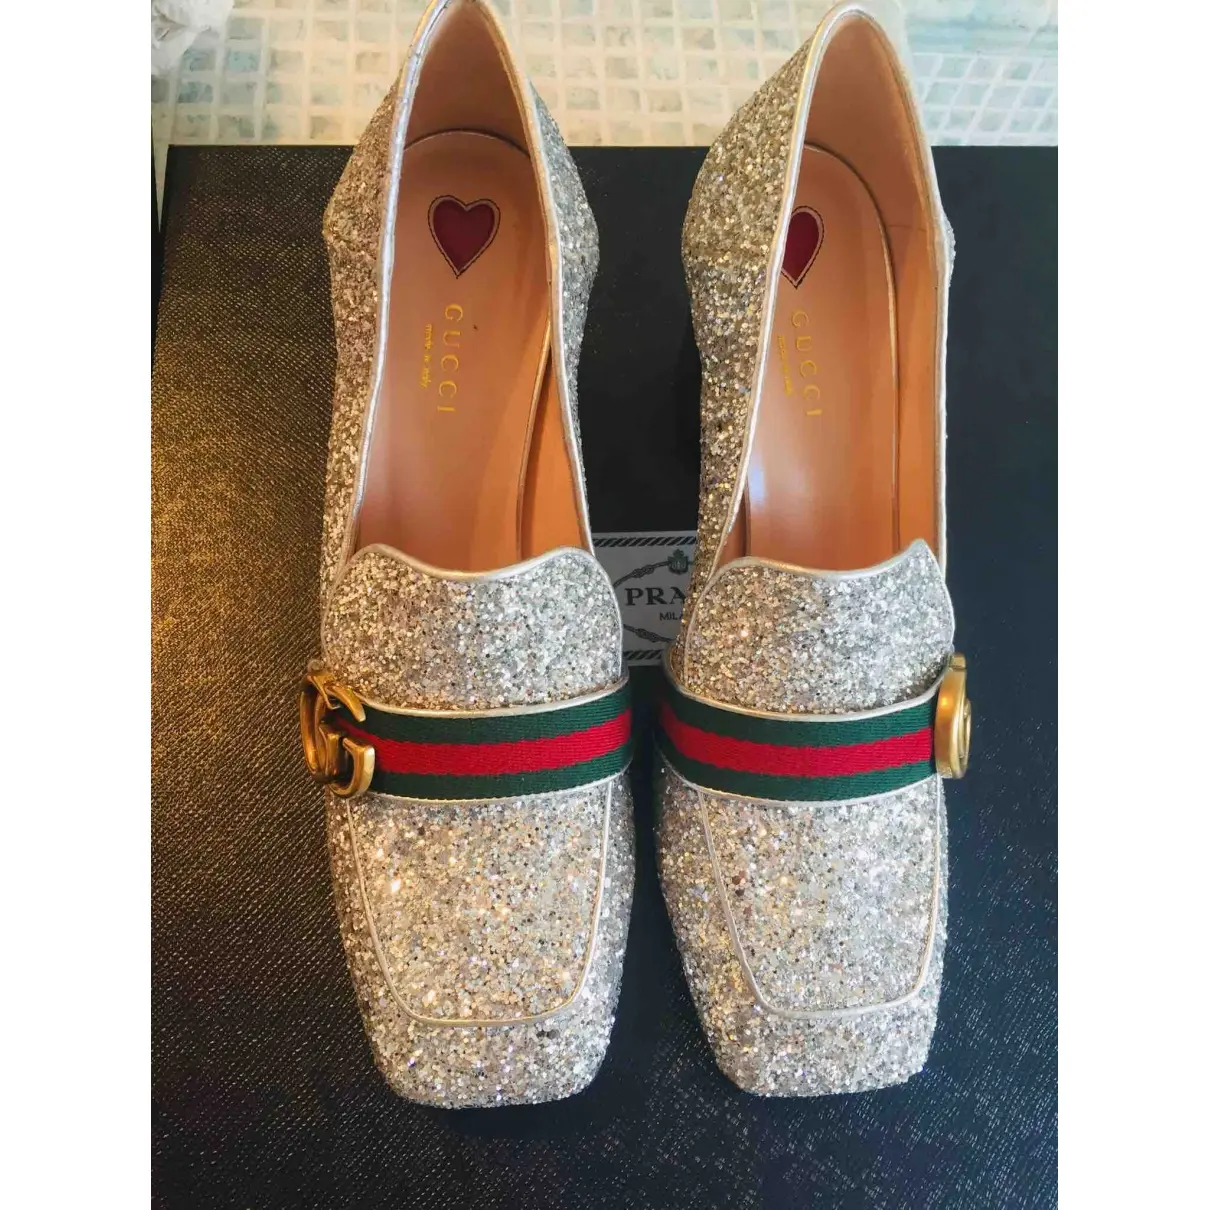 Gucci Marmont glitter heels for sale